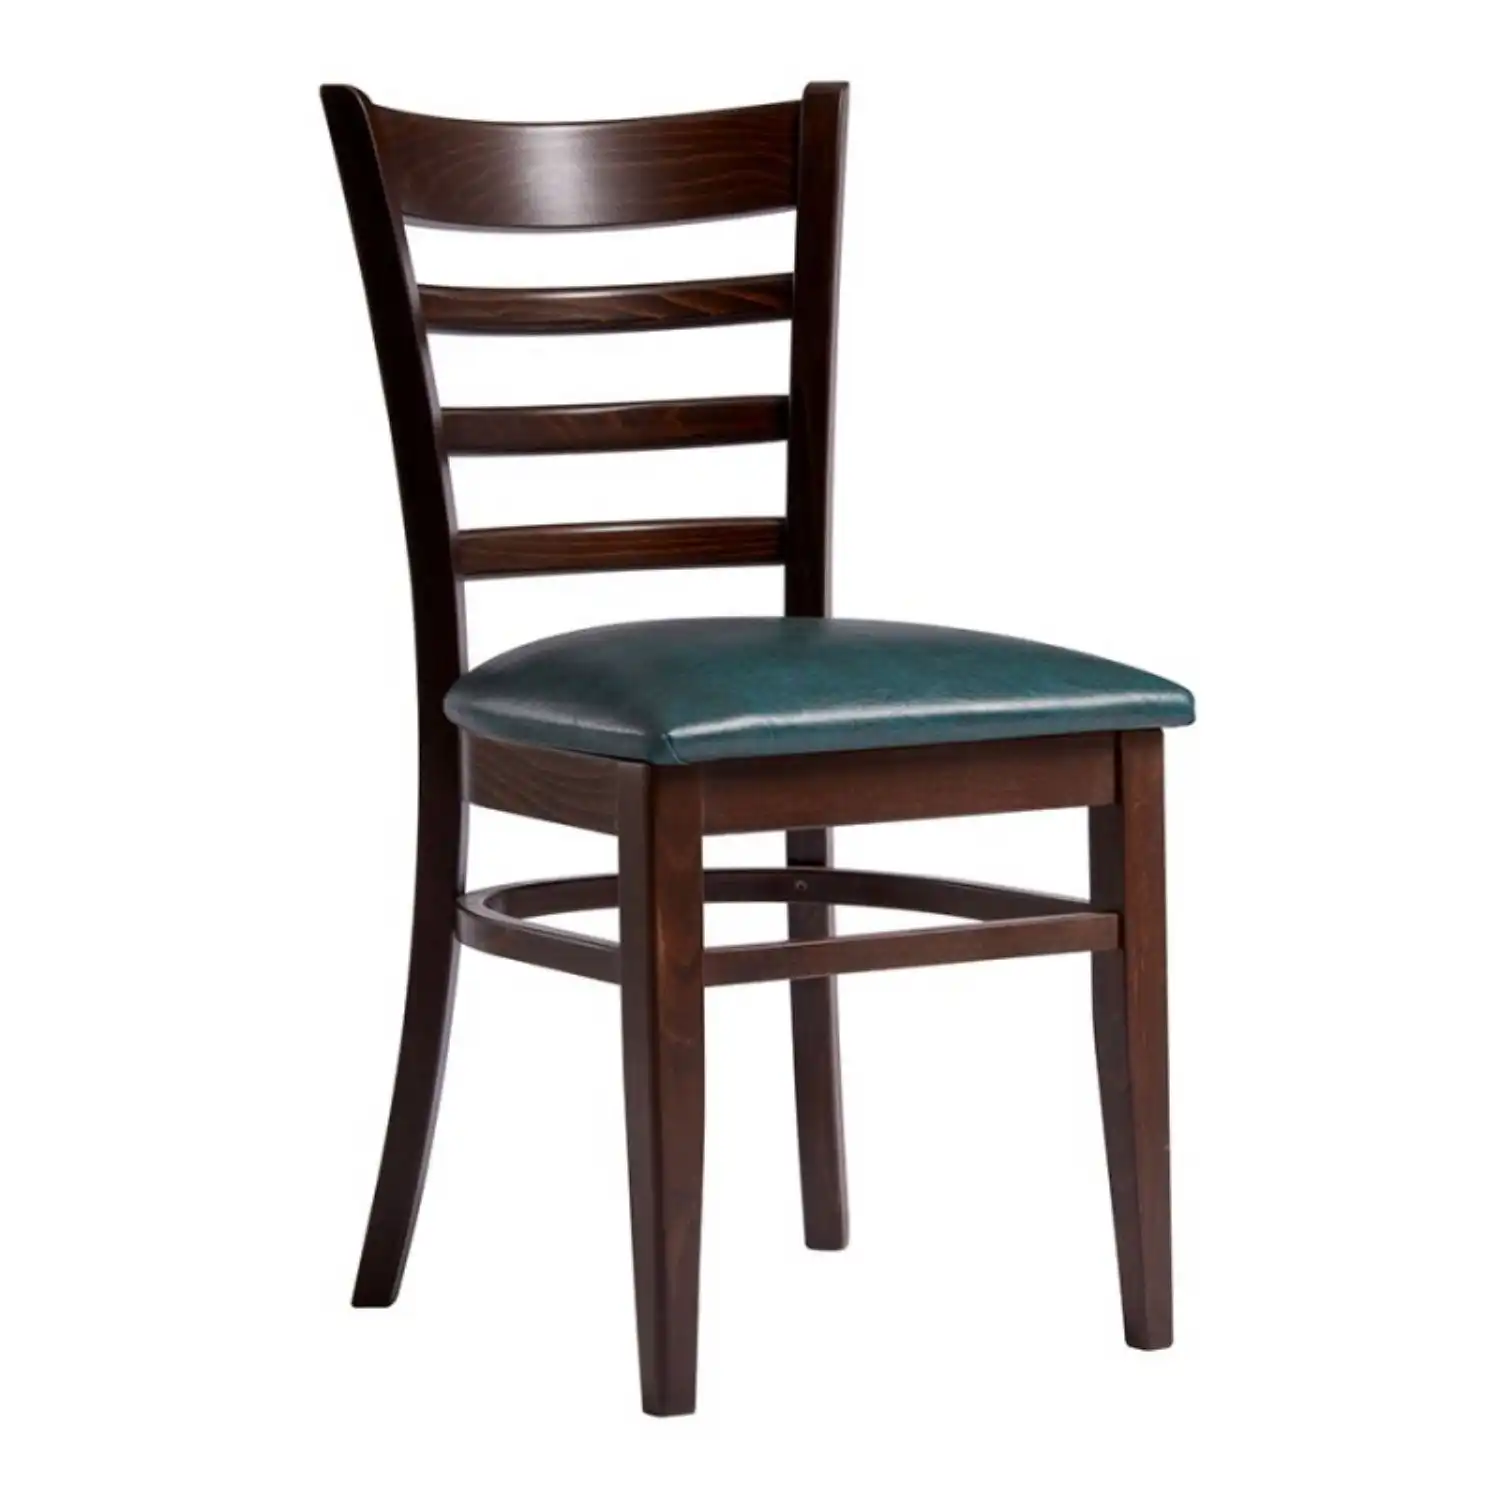 Dining Chair in Dark Solid Wood and Upholstered Leather Seat